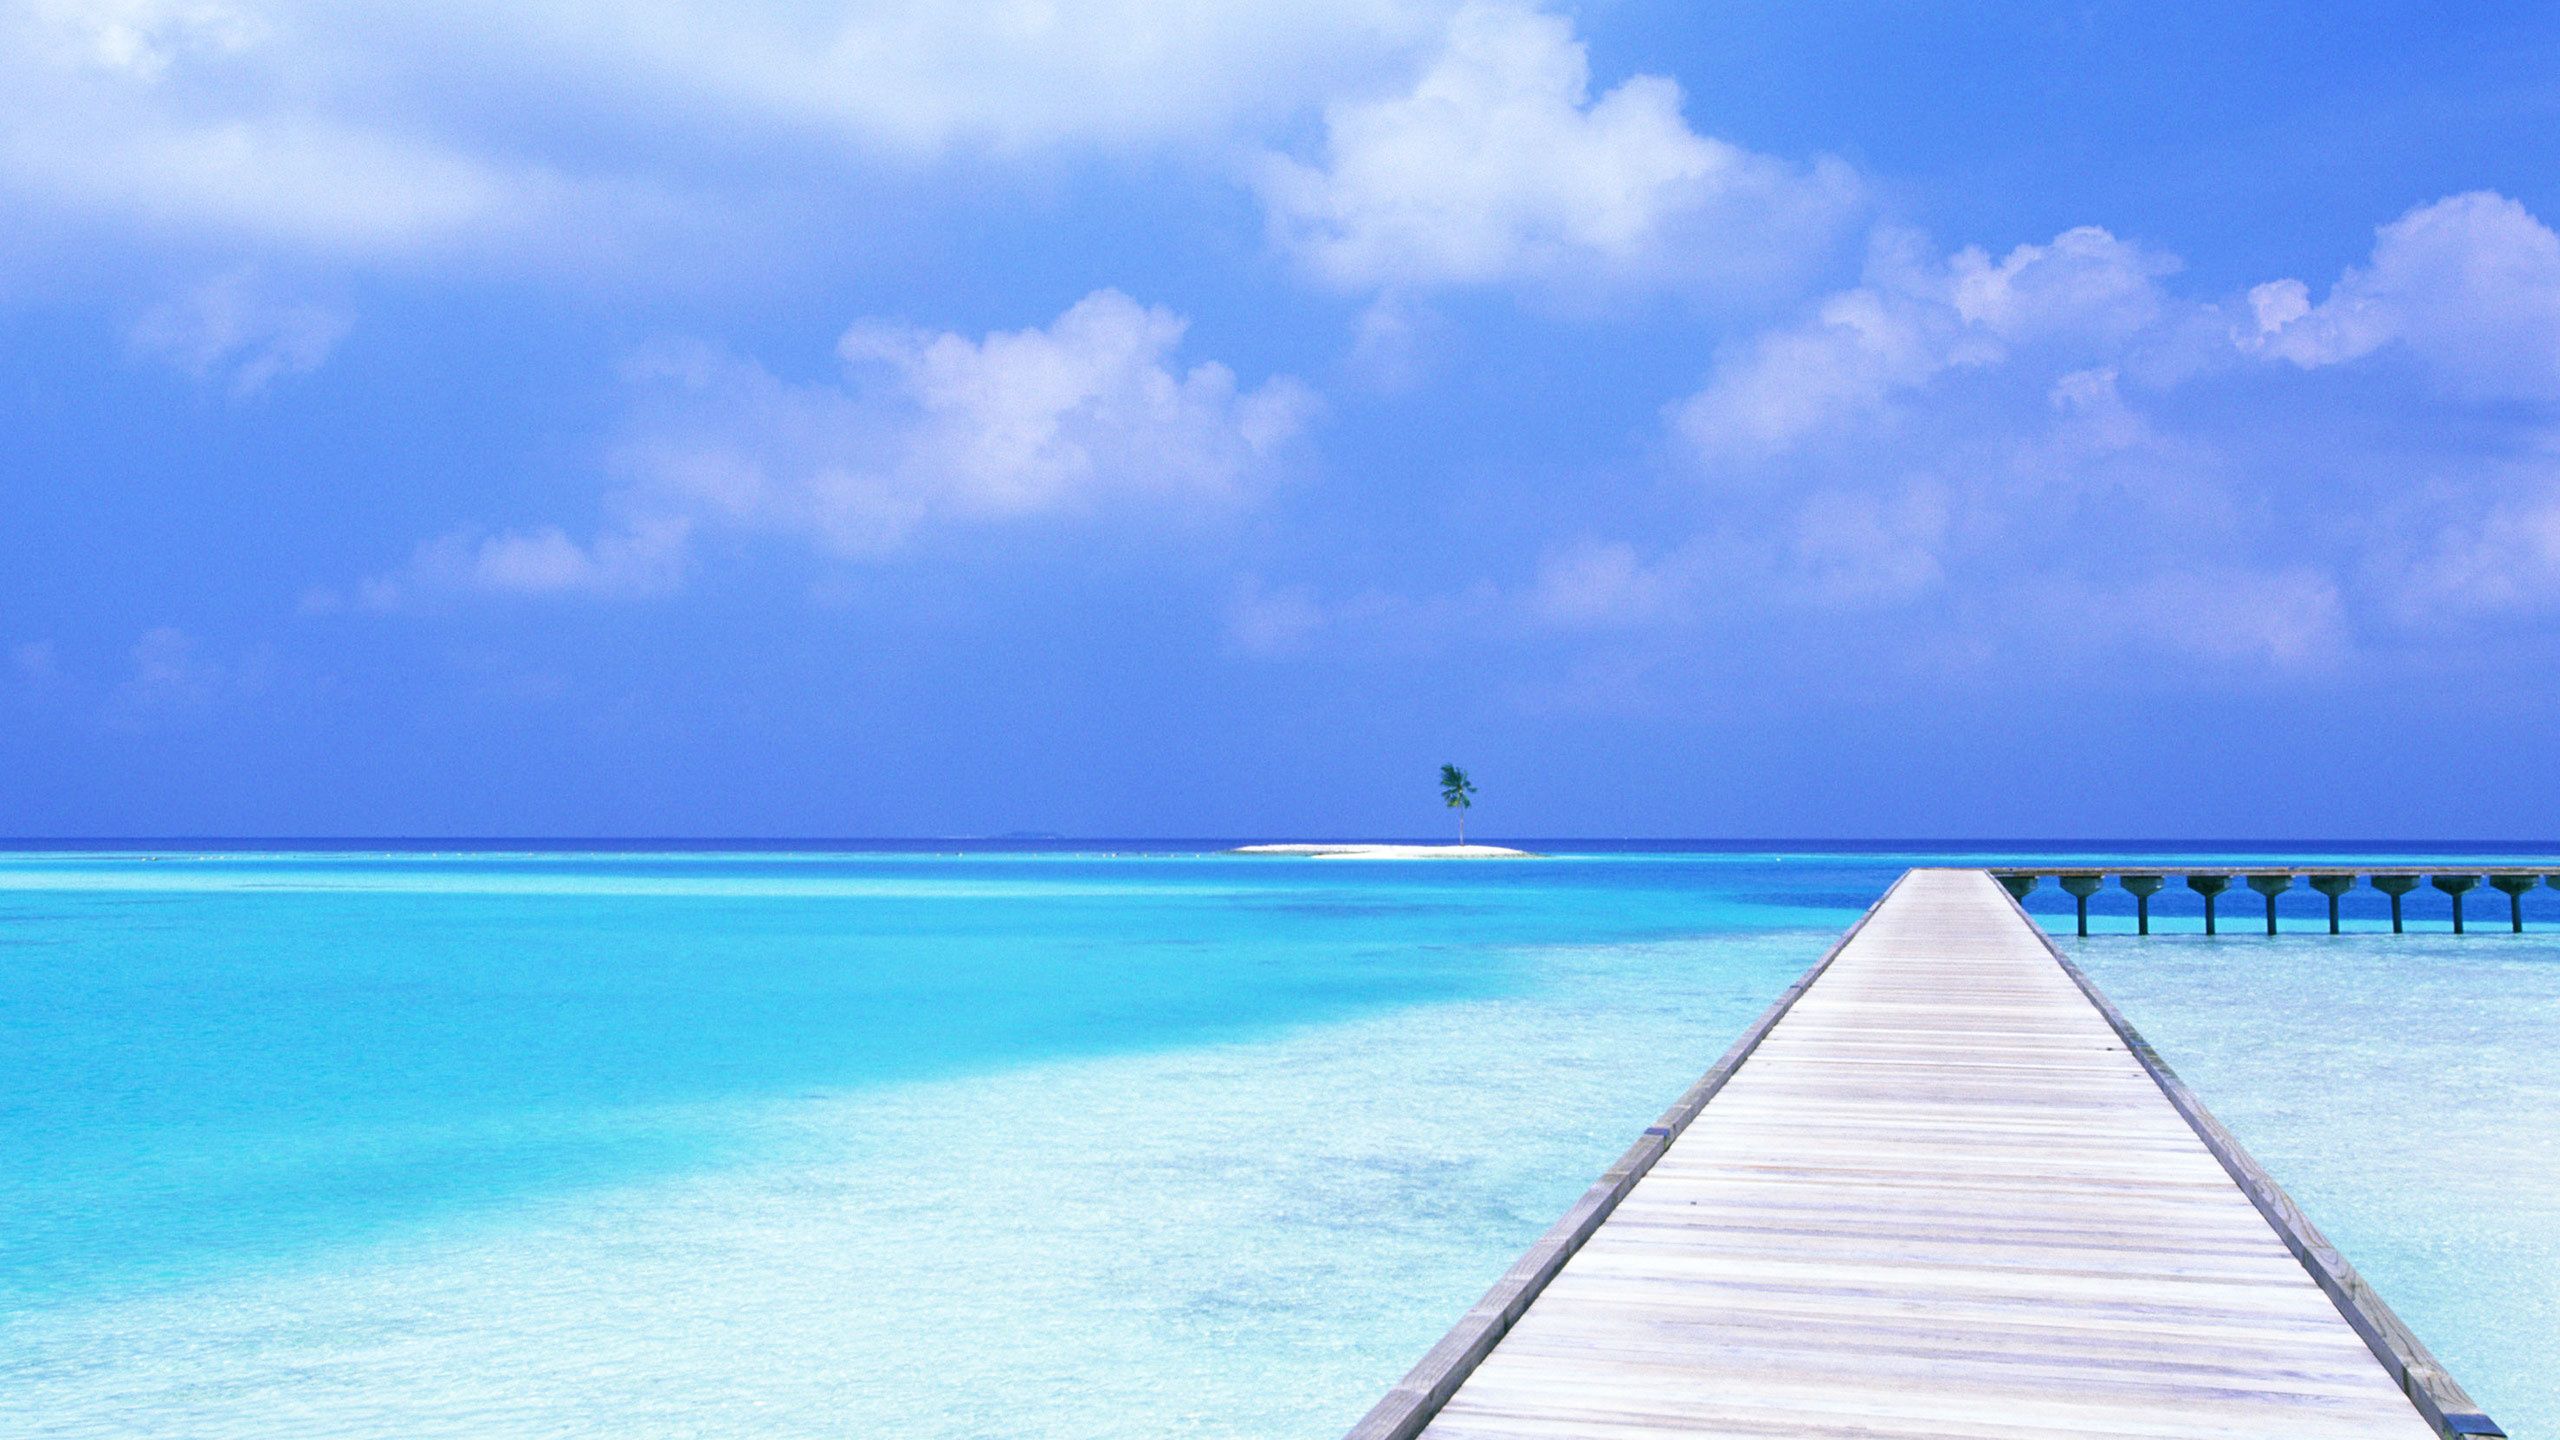 Awesome crystal blue ocean wallpaper - Beach Wallpapers